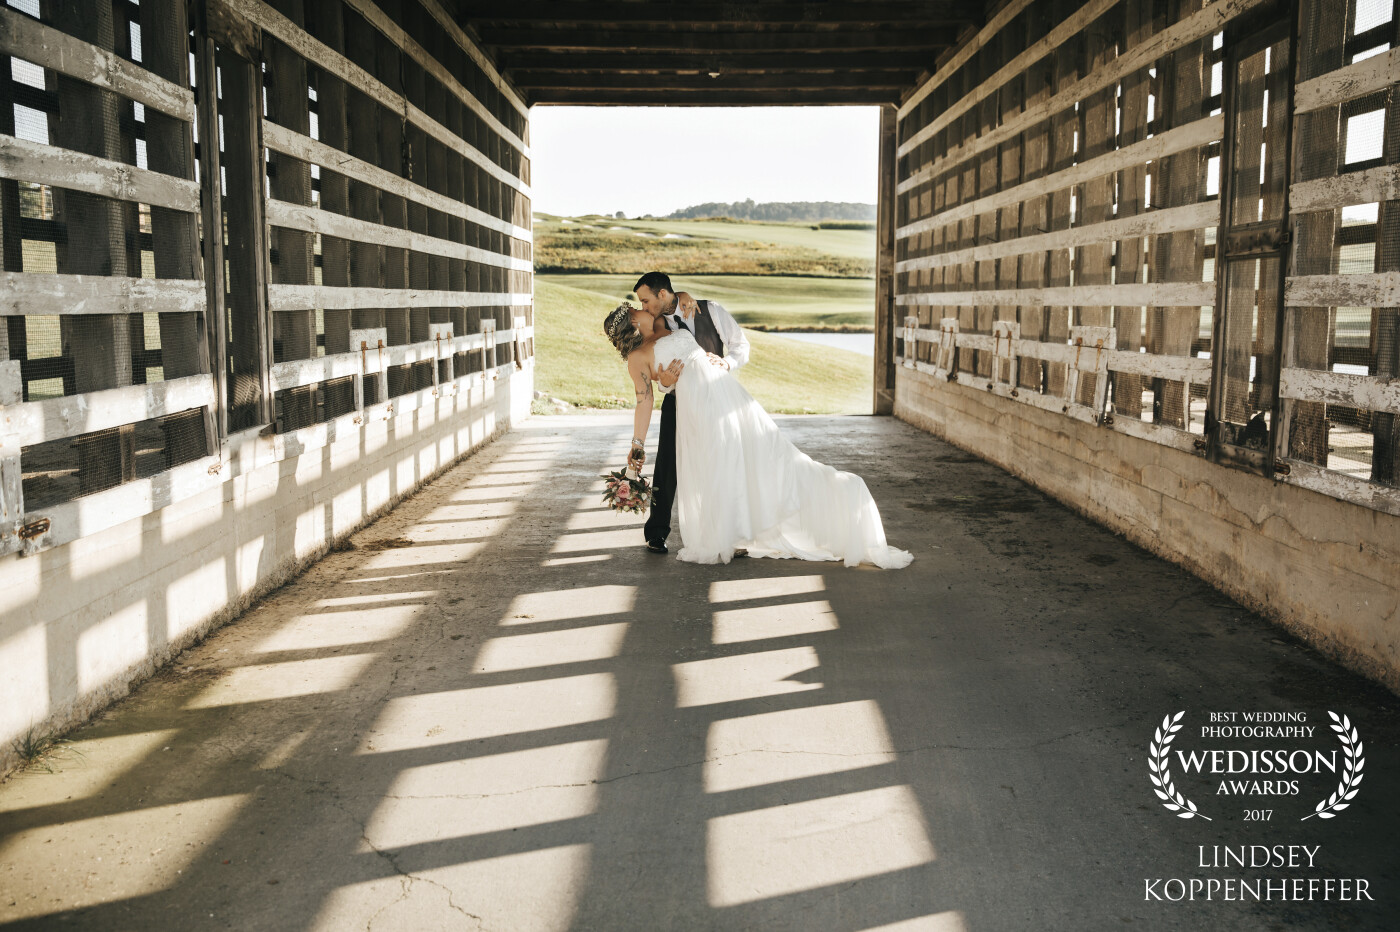 While searching for a unique spot on a golf course we pulled up to this little gem of a bridge reminiscent of a chicken coop. The structure made for some neat shadows and lines and it tied in perfectly with their country styled wedding. It's also an added bonus when your groom loves a good dip. Congrats, Justin and Lauren!